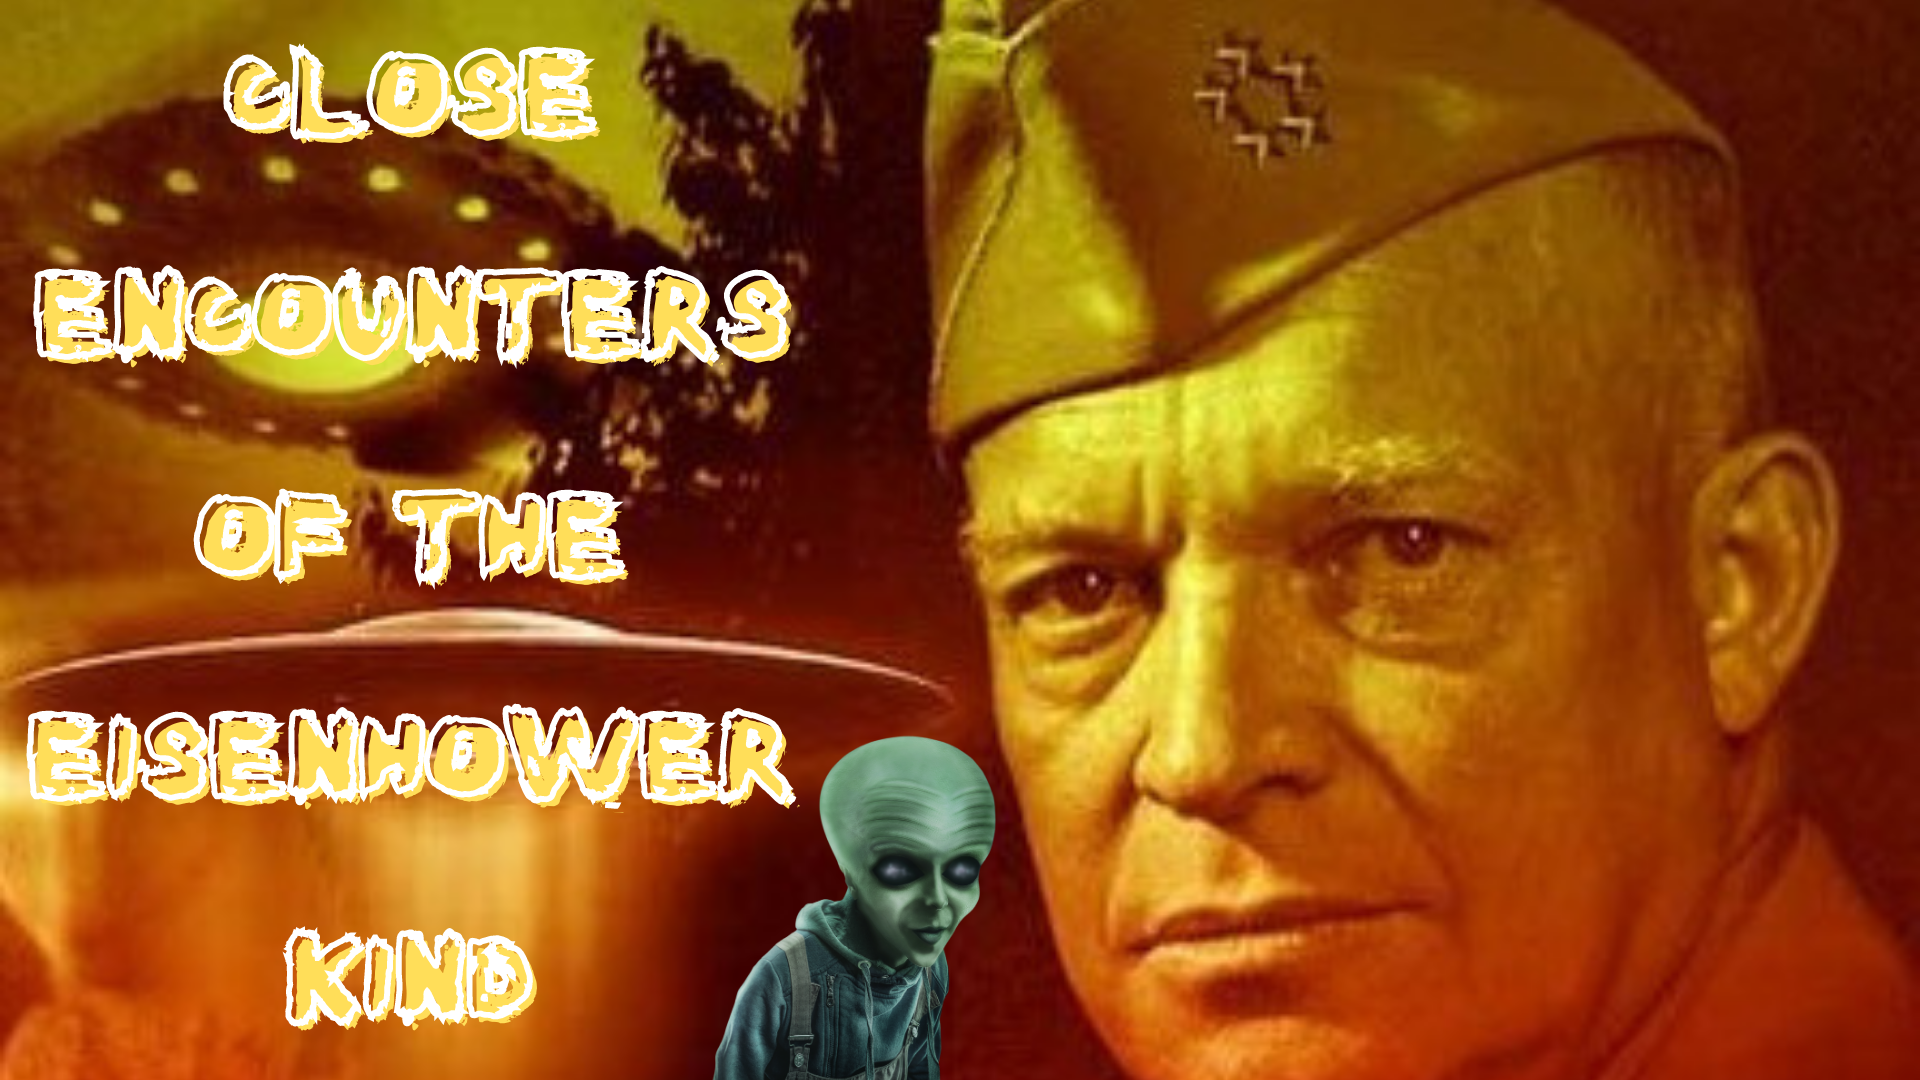 Thumbnail for Ep. #415: Close Encounters of the Eisenhower Kind w/ Paul Blake Smith